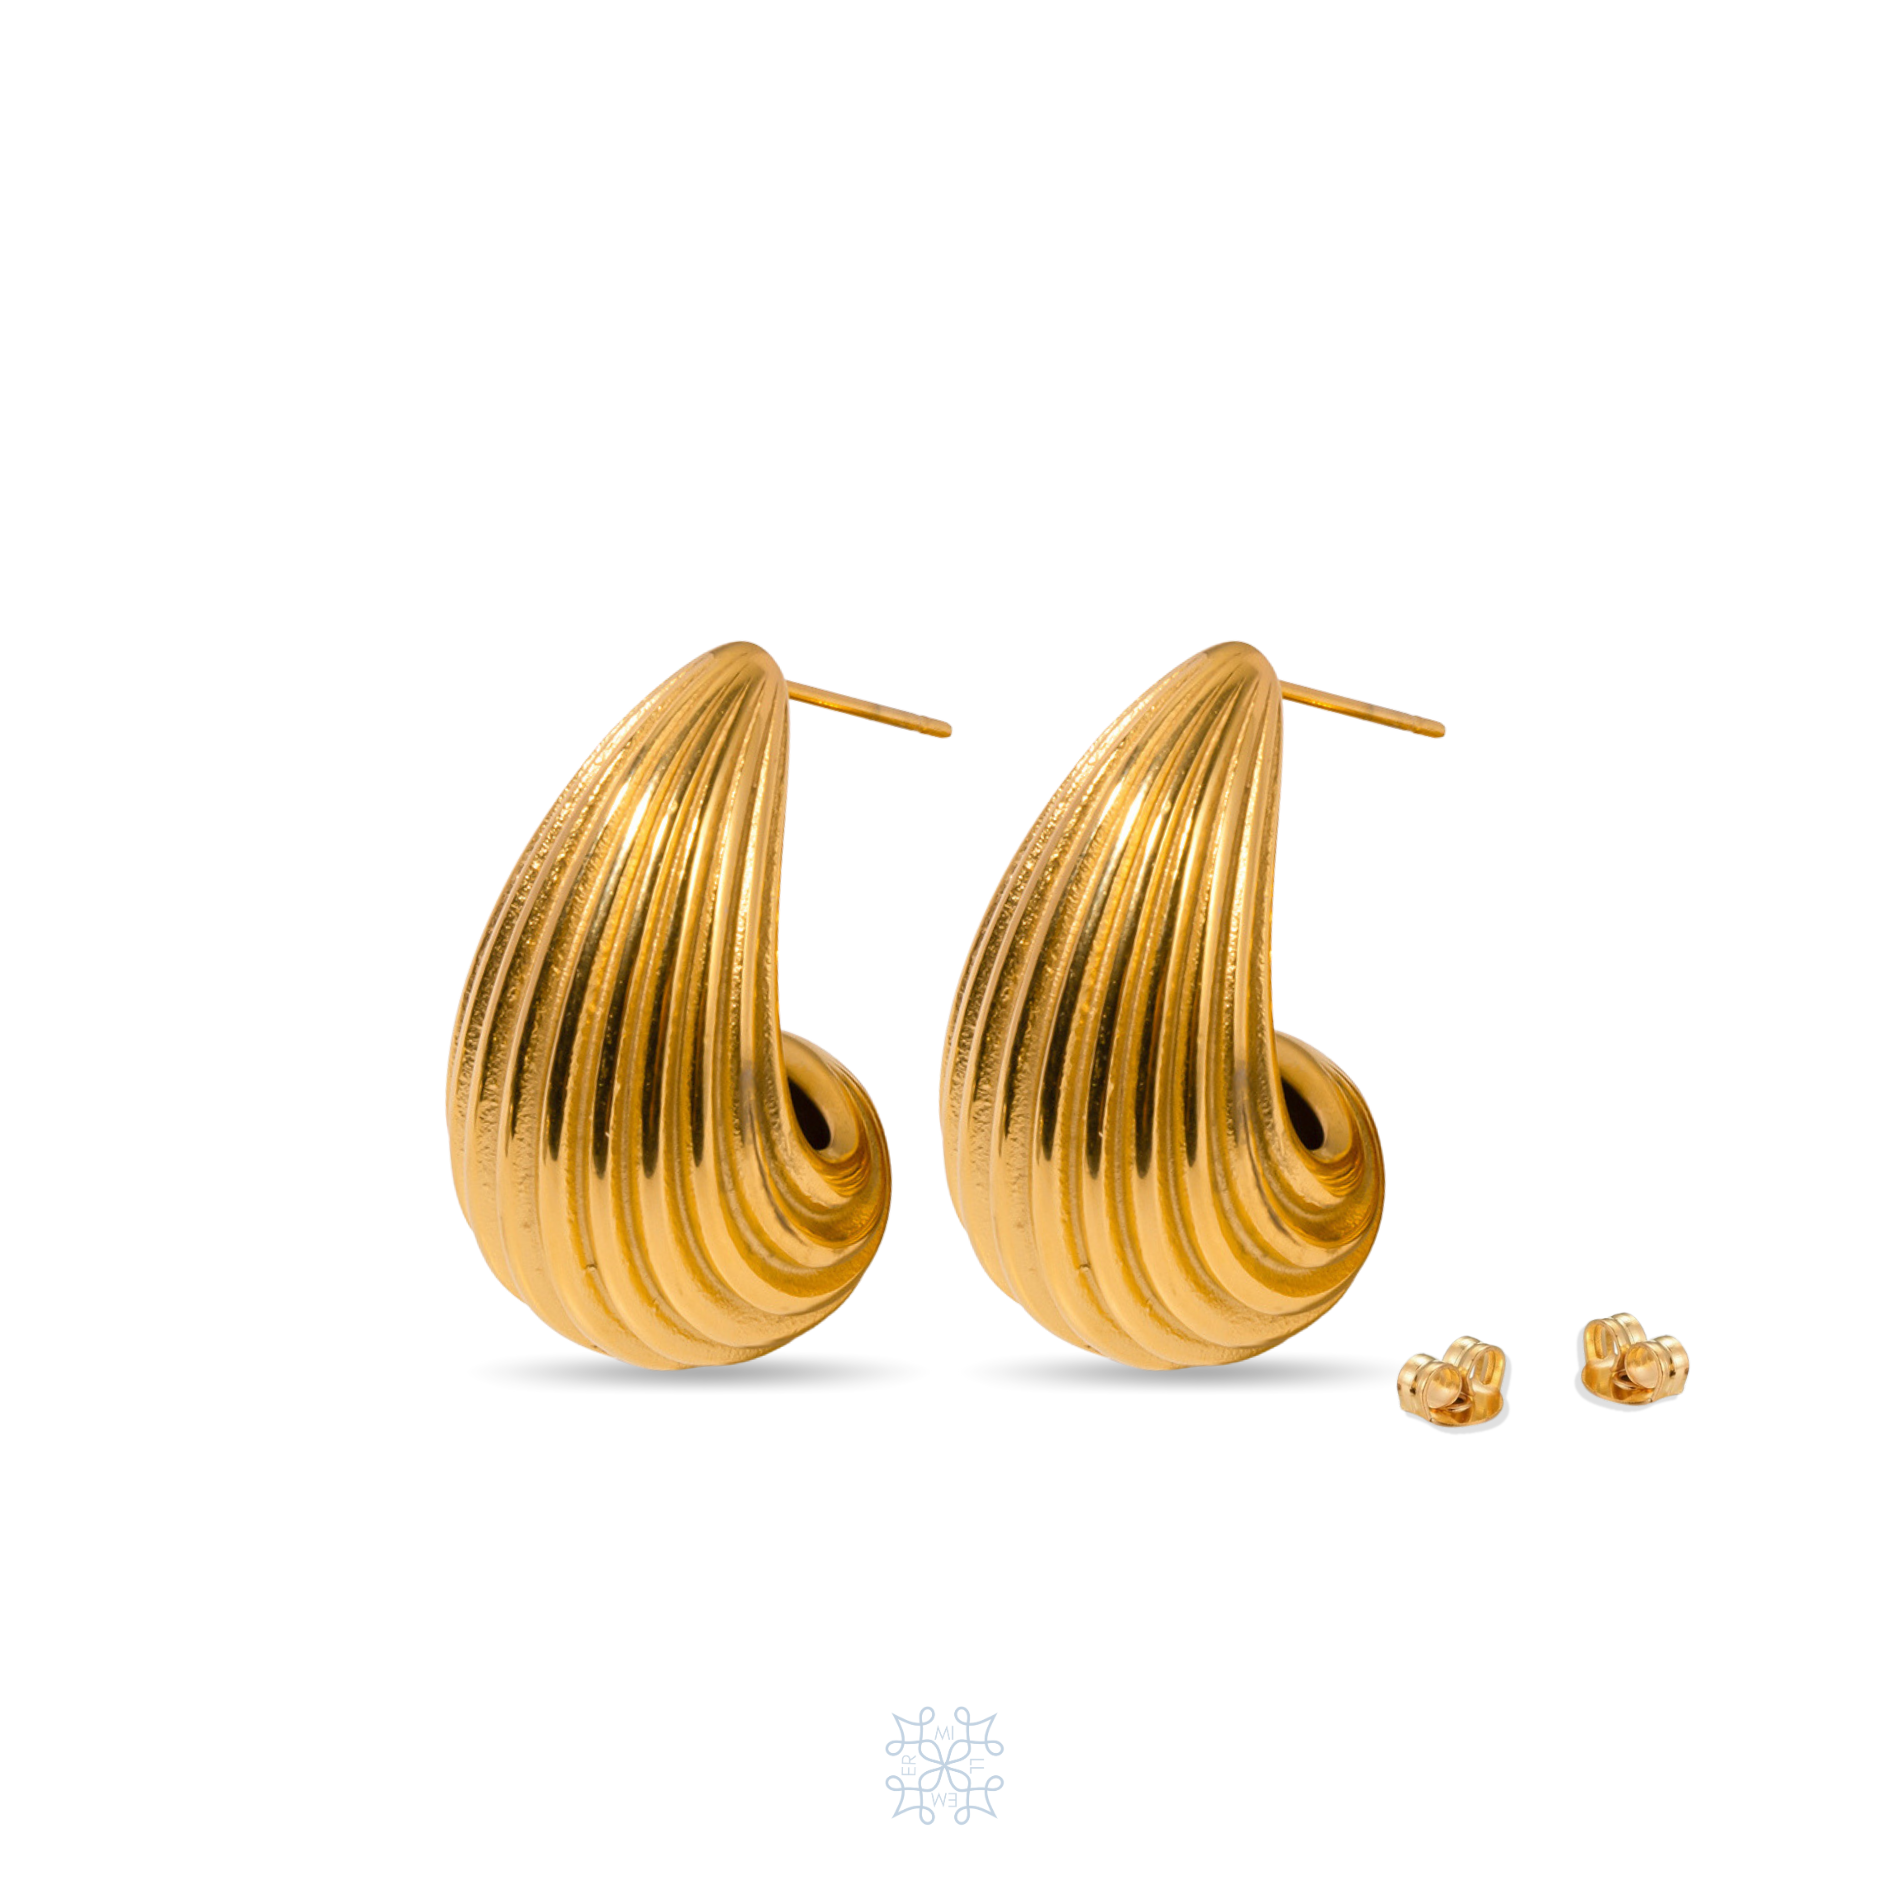 Gold pebble Earrings with lines engraved in the metal. The earrings have the form of a waterdrop. 